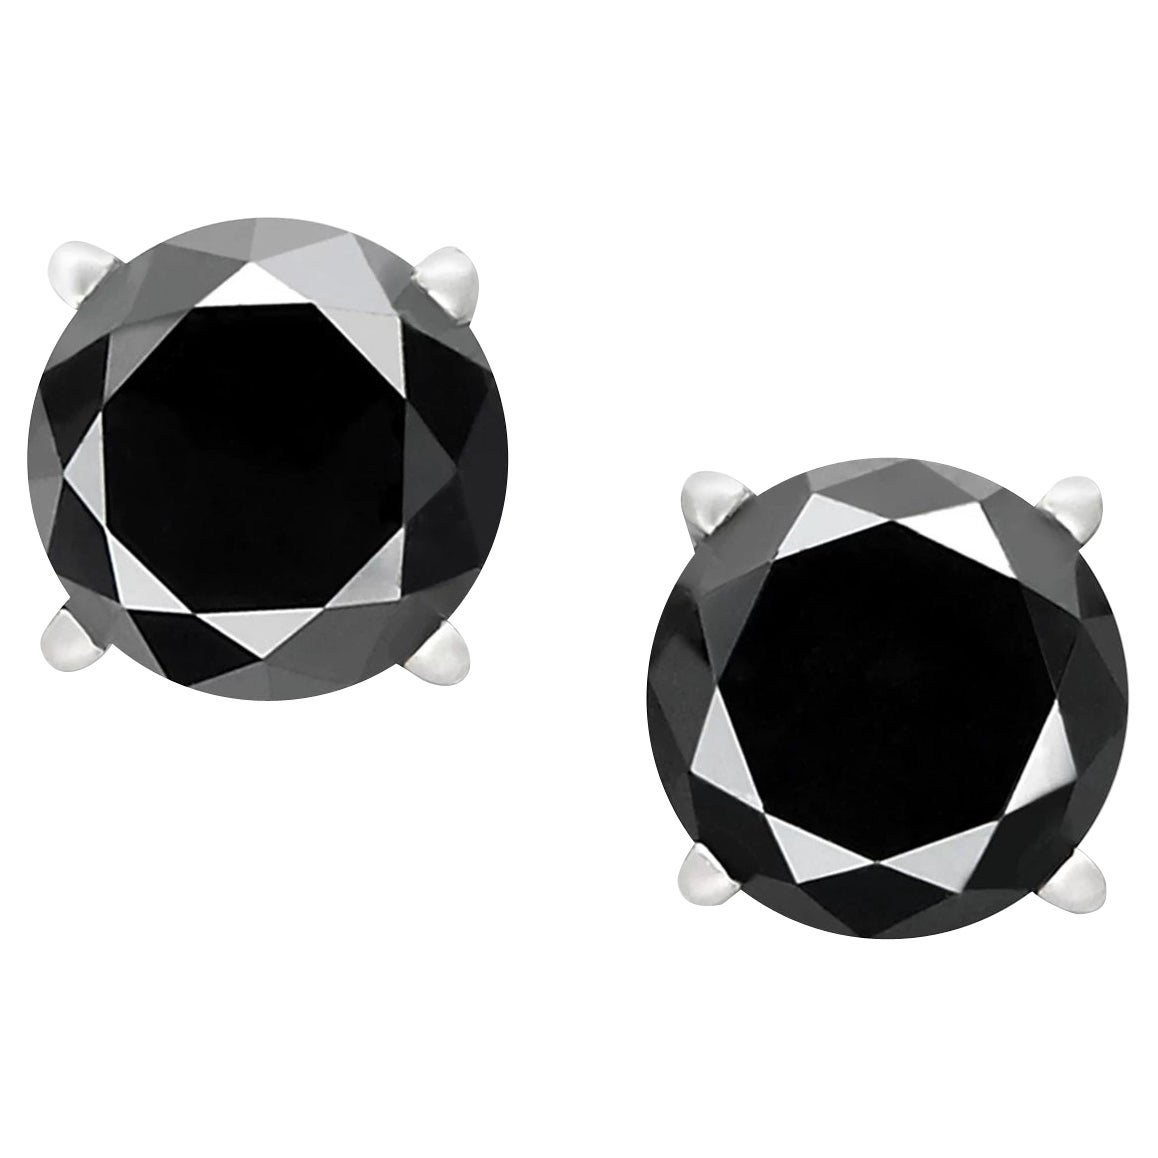 3.7 Carat Total Round Black Diamond Solitaire Stud Earrings in 14 K White Gold